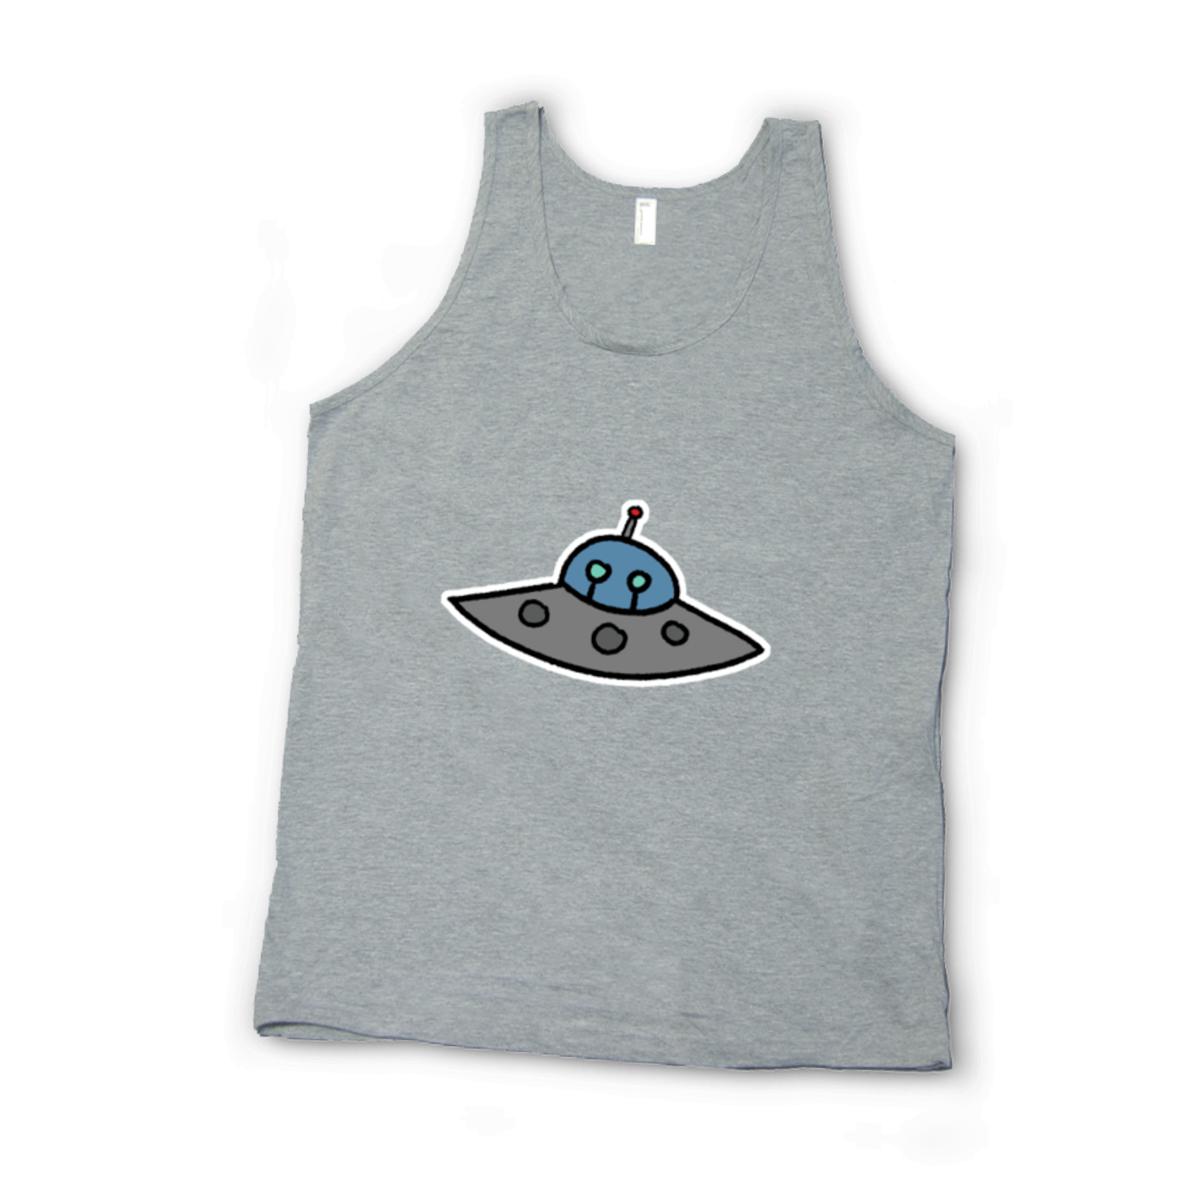 Flying Saucer Unisex Tank Top Small heather-grey